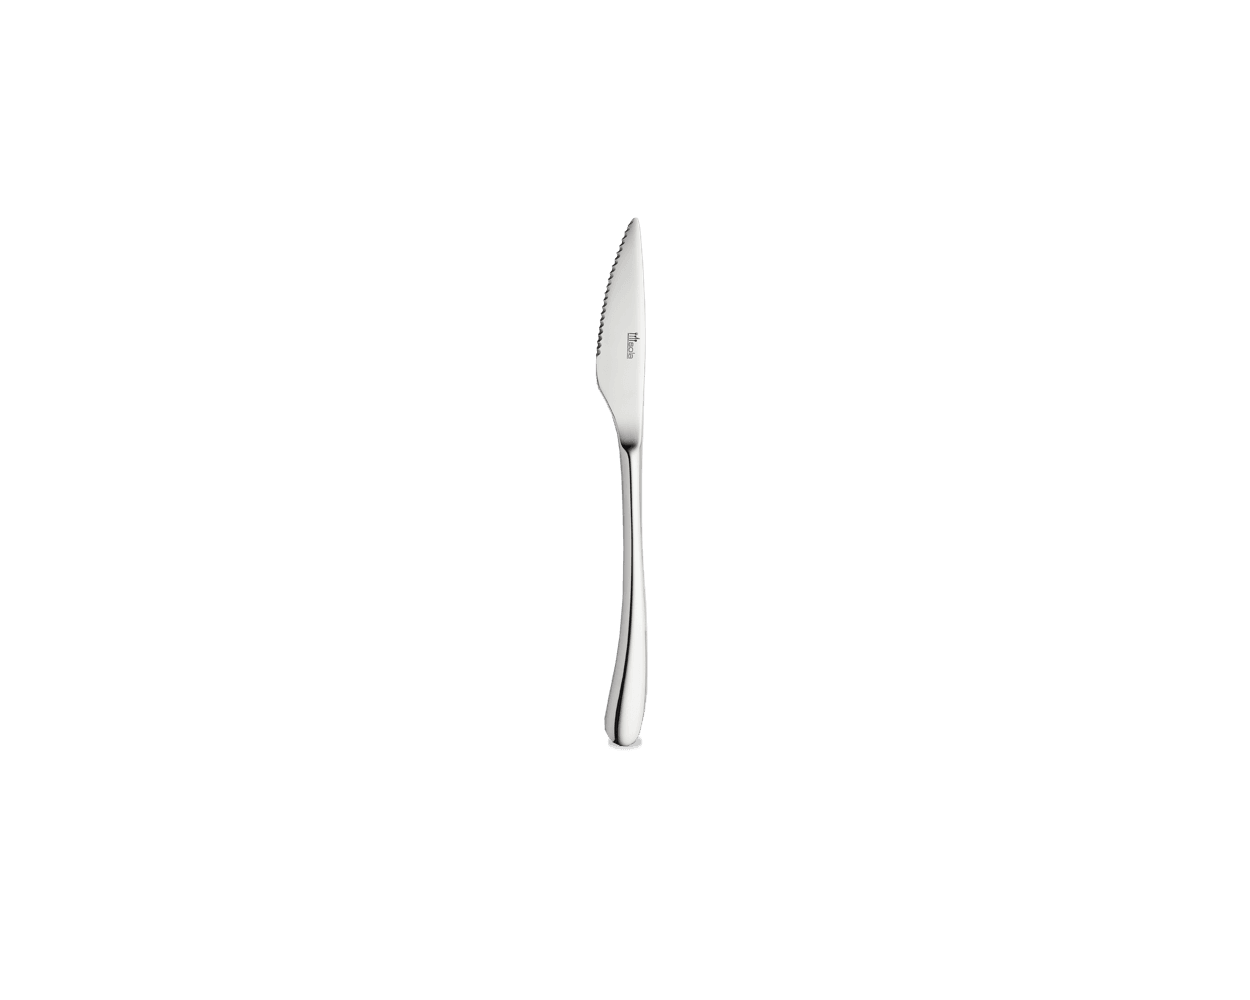 Sola Oasis Steak Knife Silver 18/10 Stainless Steel 10mm, Length 234mm - Pack of 12